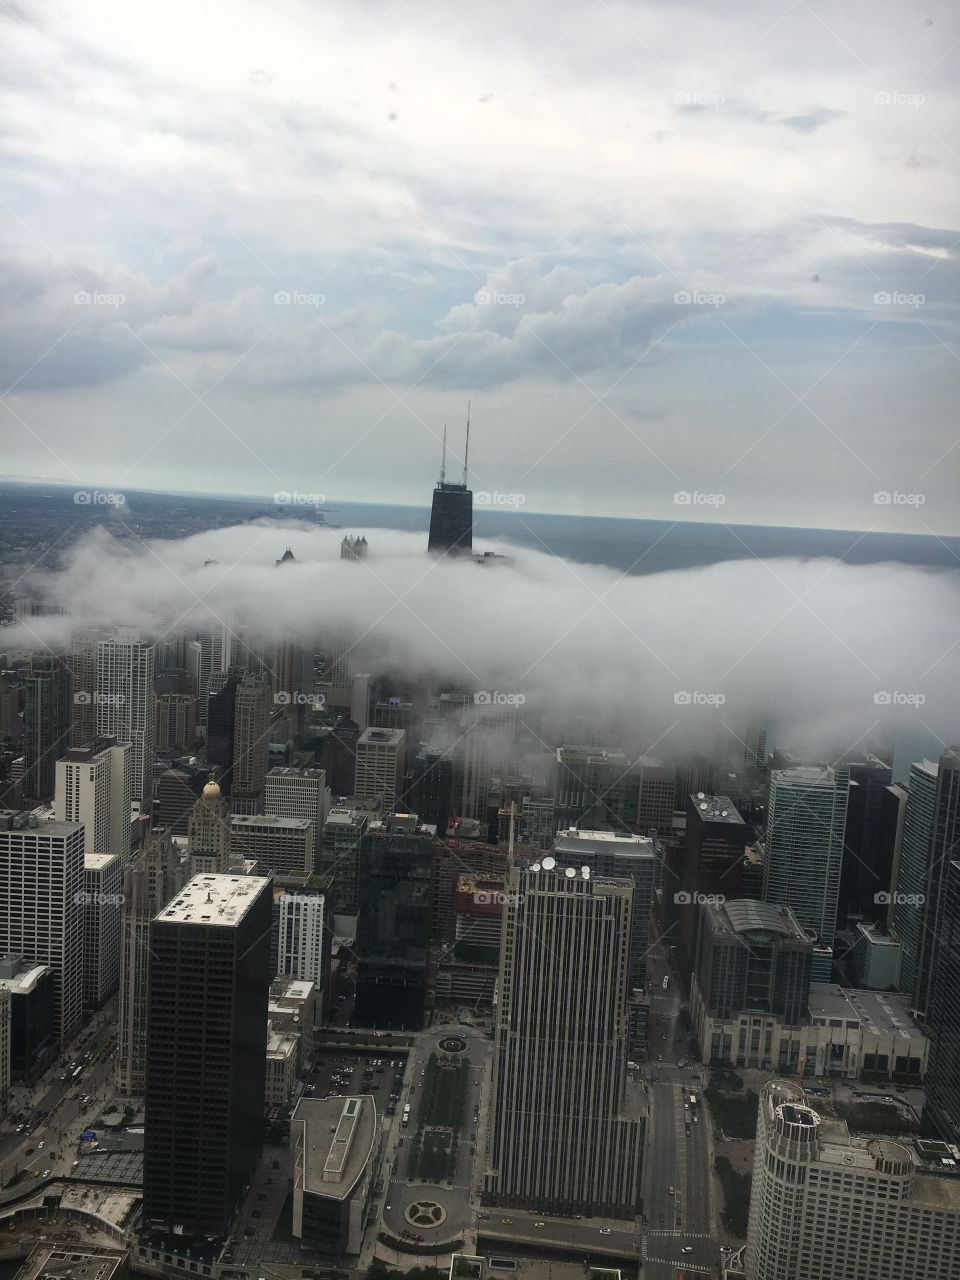 Fog rolling in from Lake Michigan
Chicago, Illinois